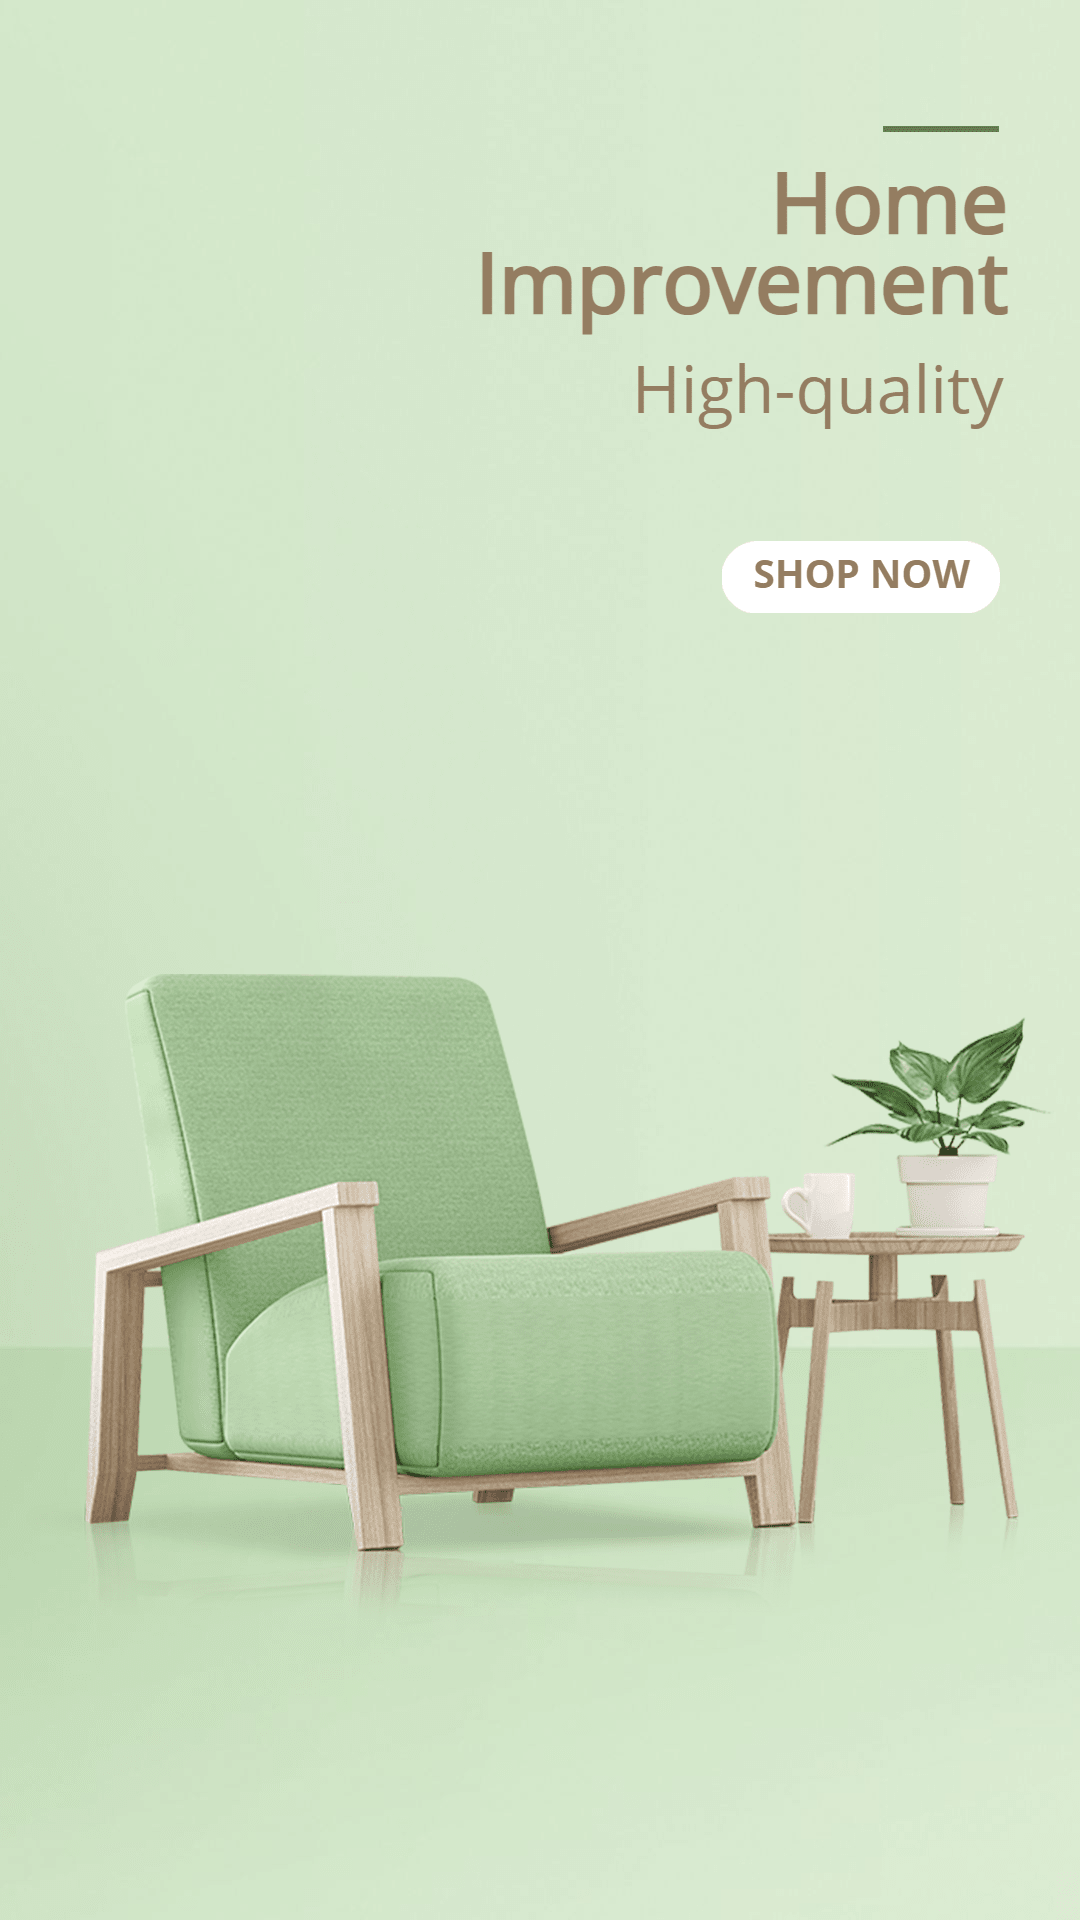 Fresh Home Decorate Furniture Green Chair Display Ecommerce Story预览效果